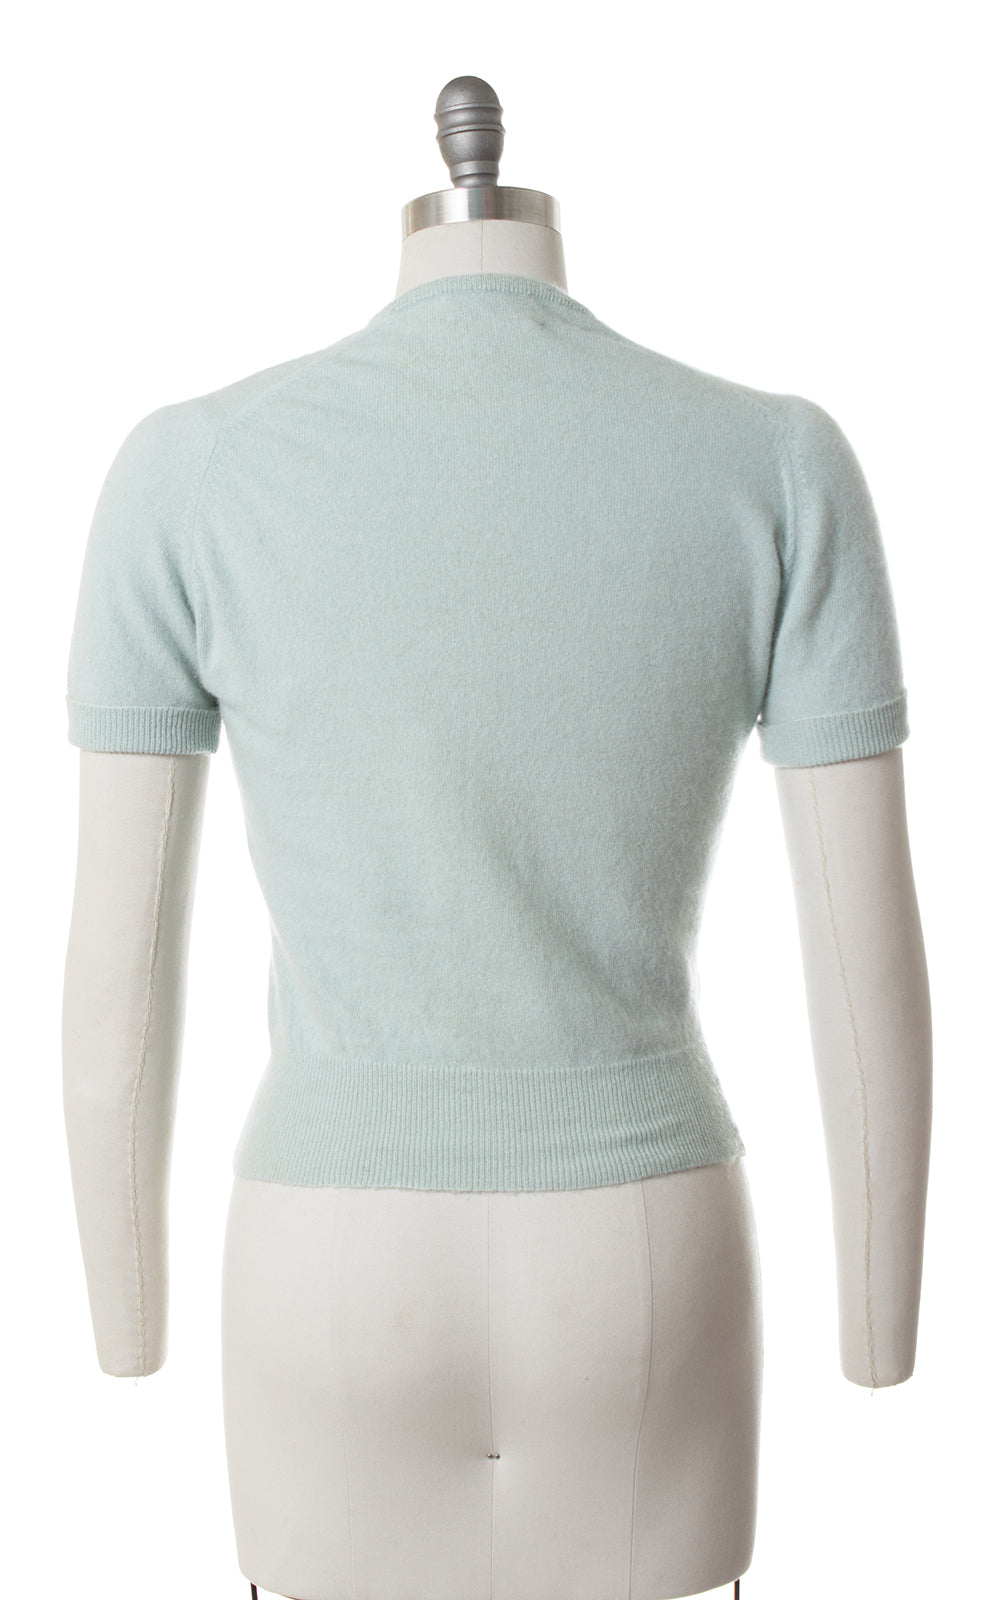 1950s Light Blue Cashmere Sweater Top | x-small/small